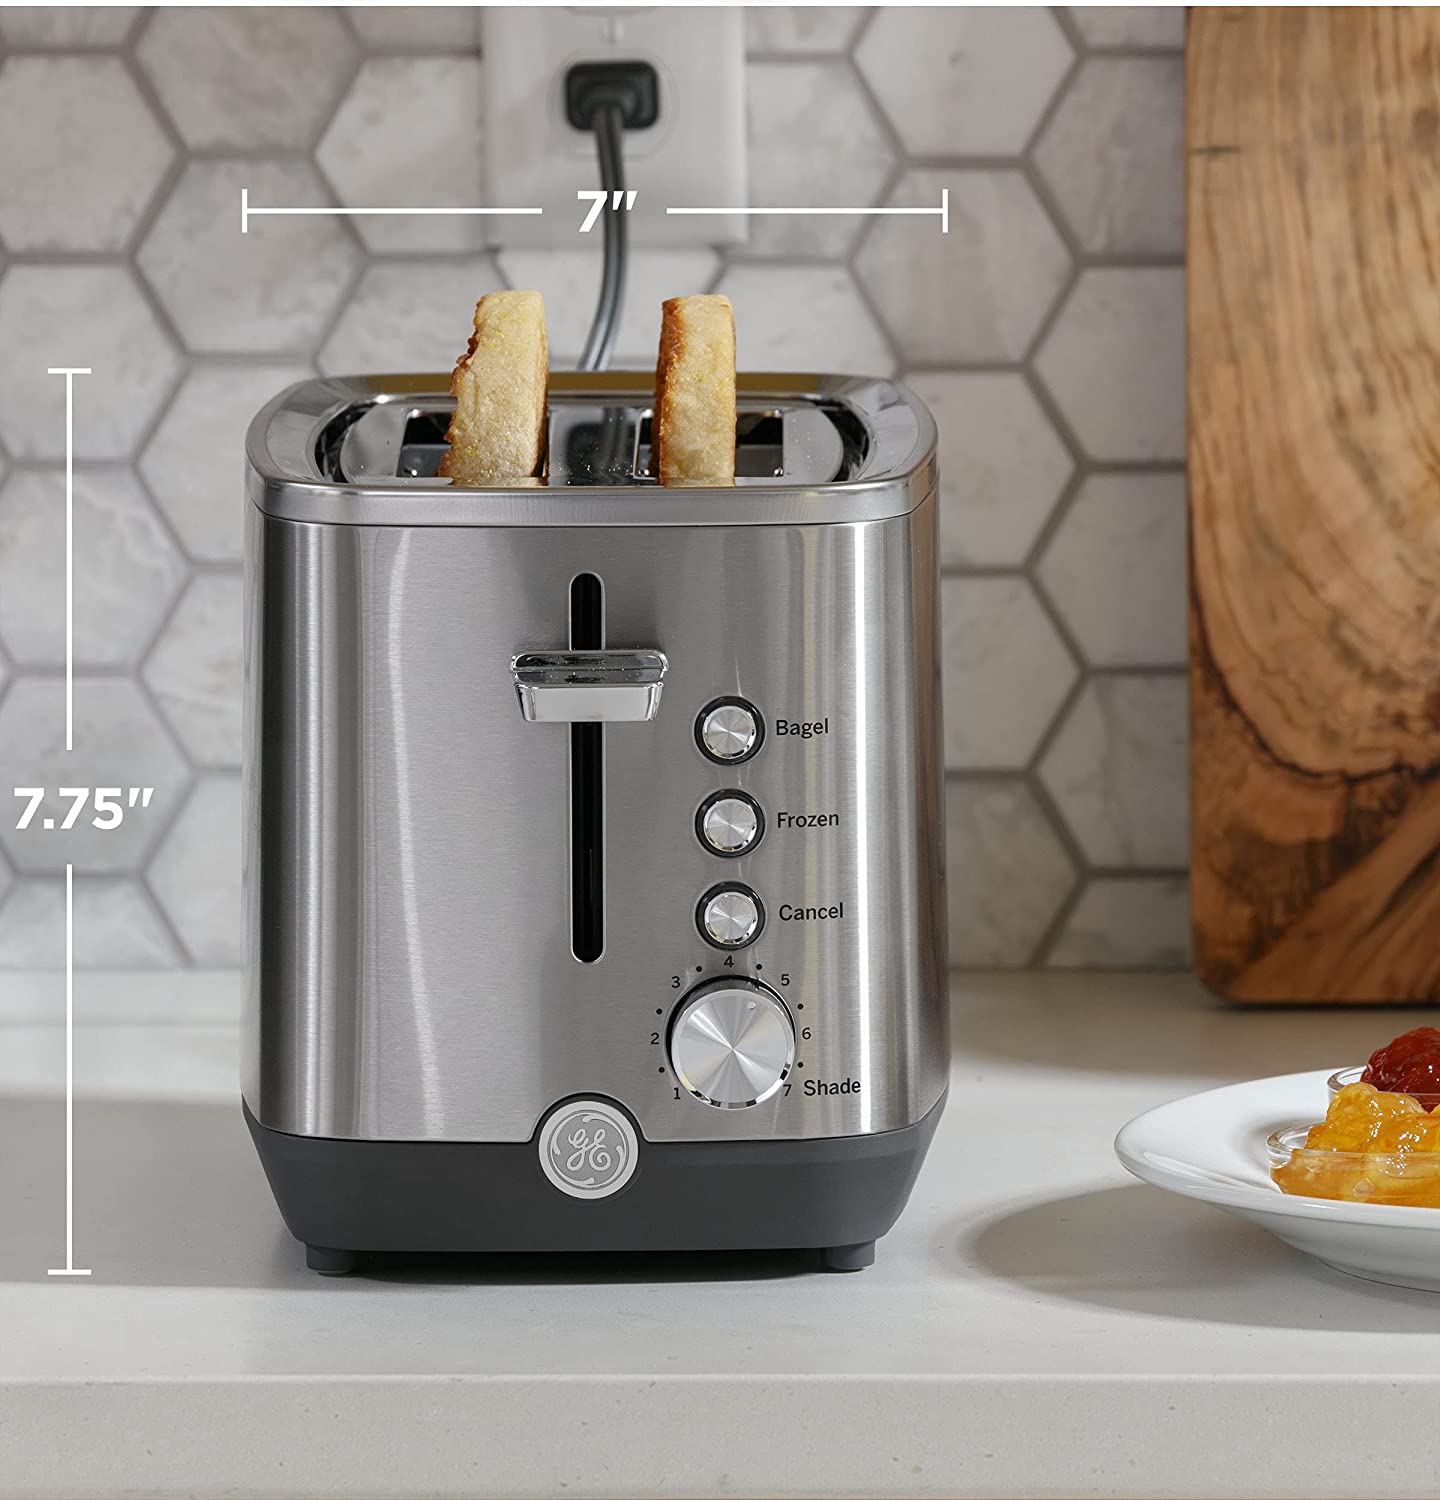 https://bigbigmart.com/wp-content/uploads/2023/05/GE-Stainless-Steel-Toaster-2-Slice-Extra-Wide-Slots-for-Toasting-Bagels-Breads-Waffles-More-7-Shade-Options-for-the-Entire-Household-to-Enjoy-Countertop-Kitchen-Essentials-850-Watts1.jpg